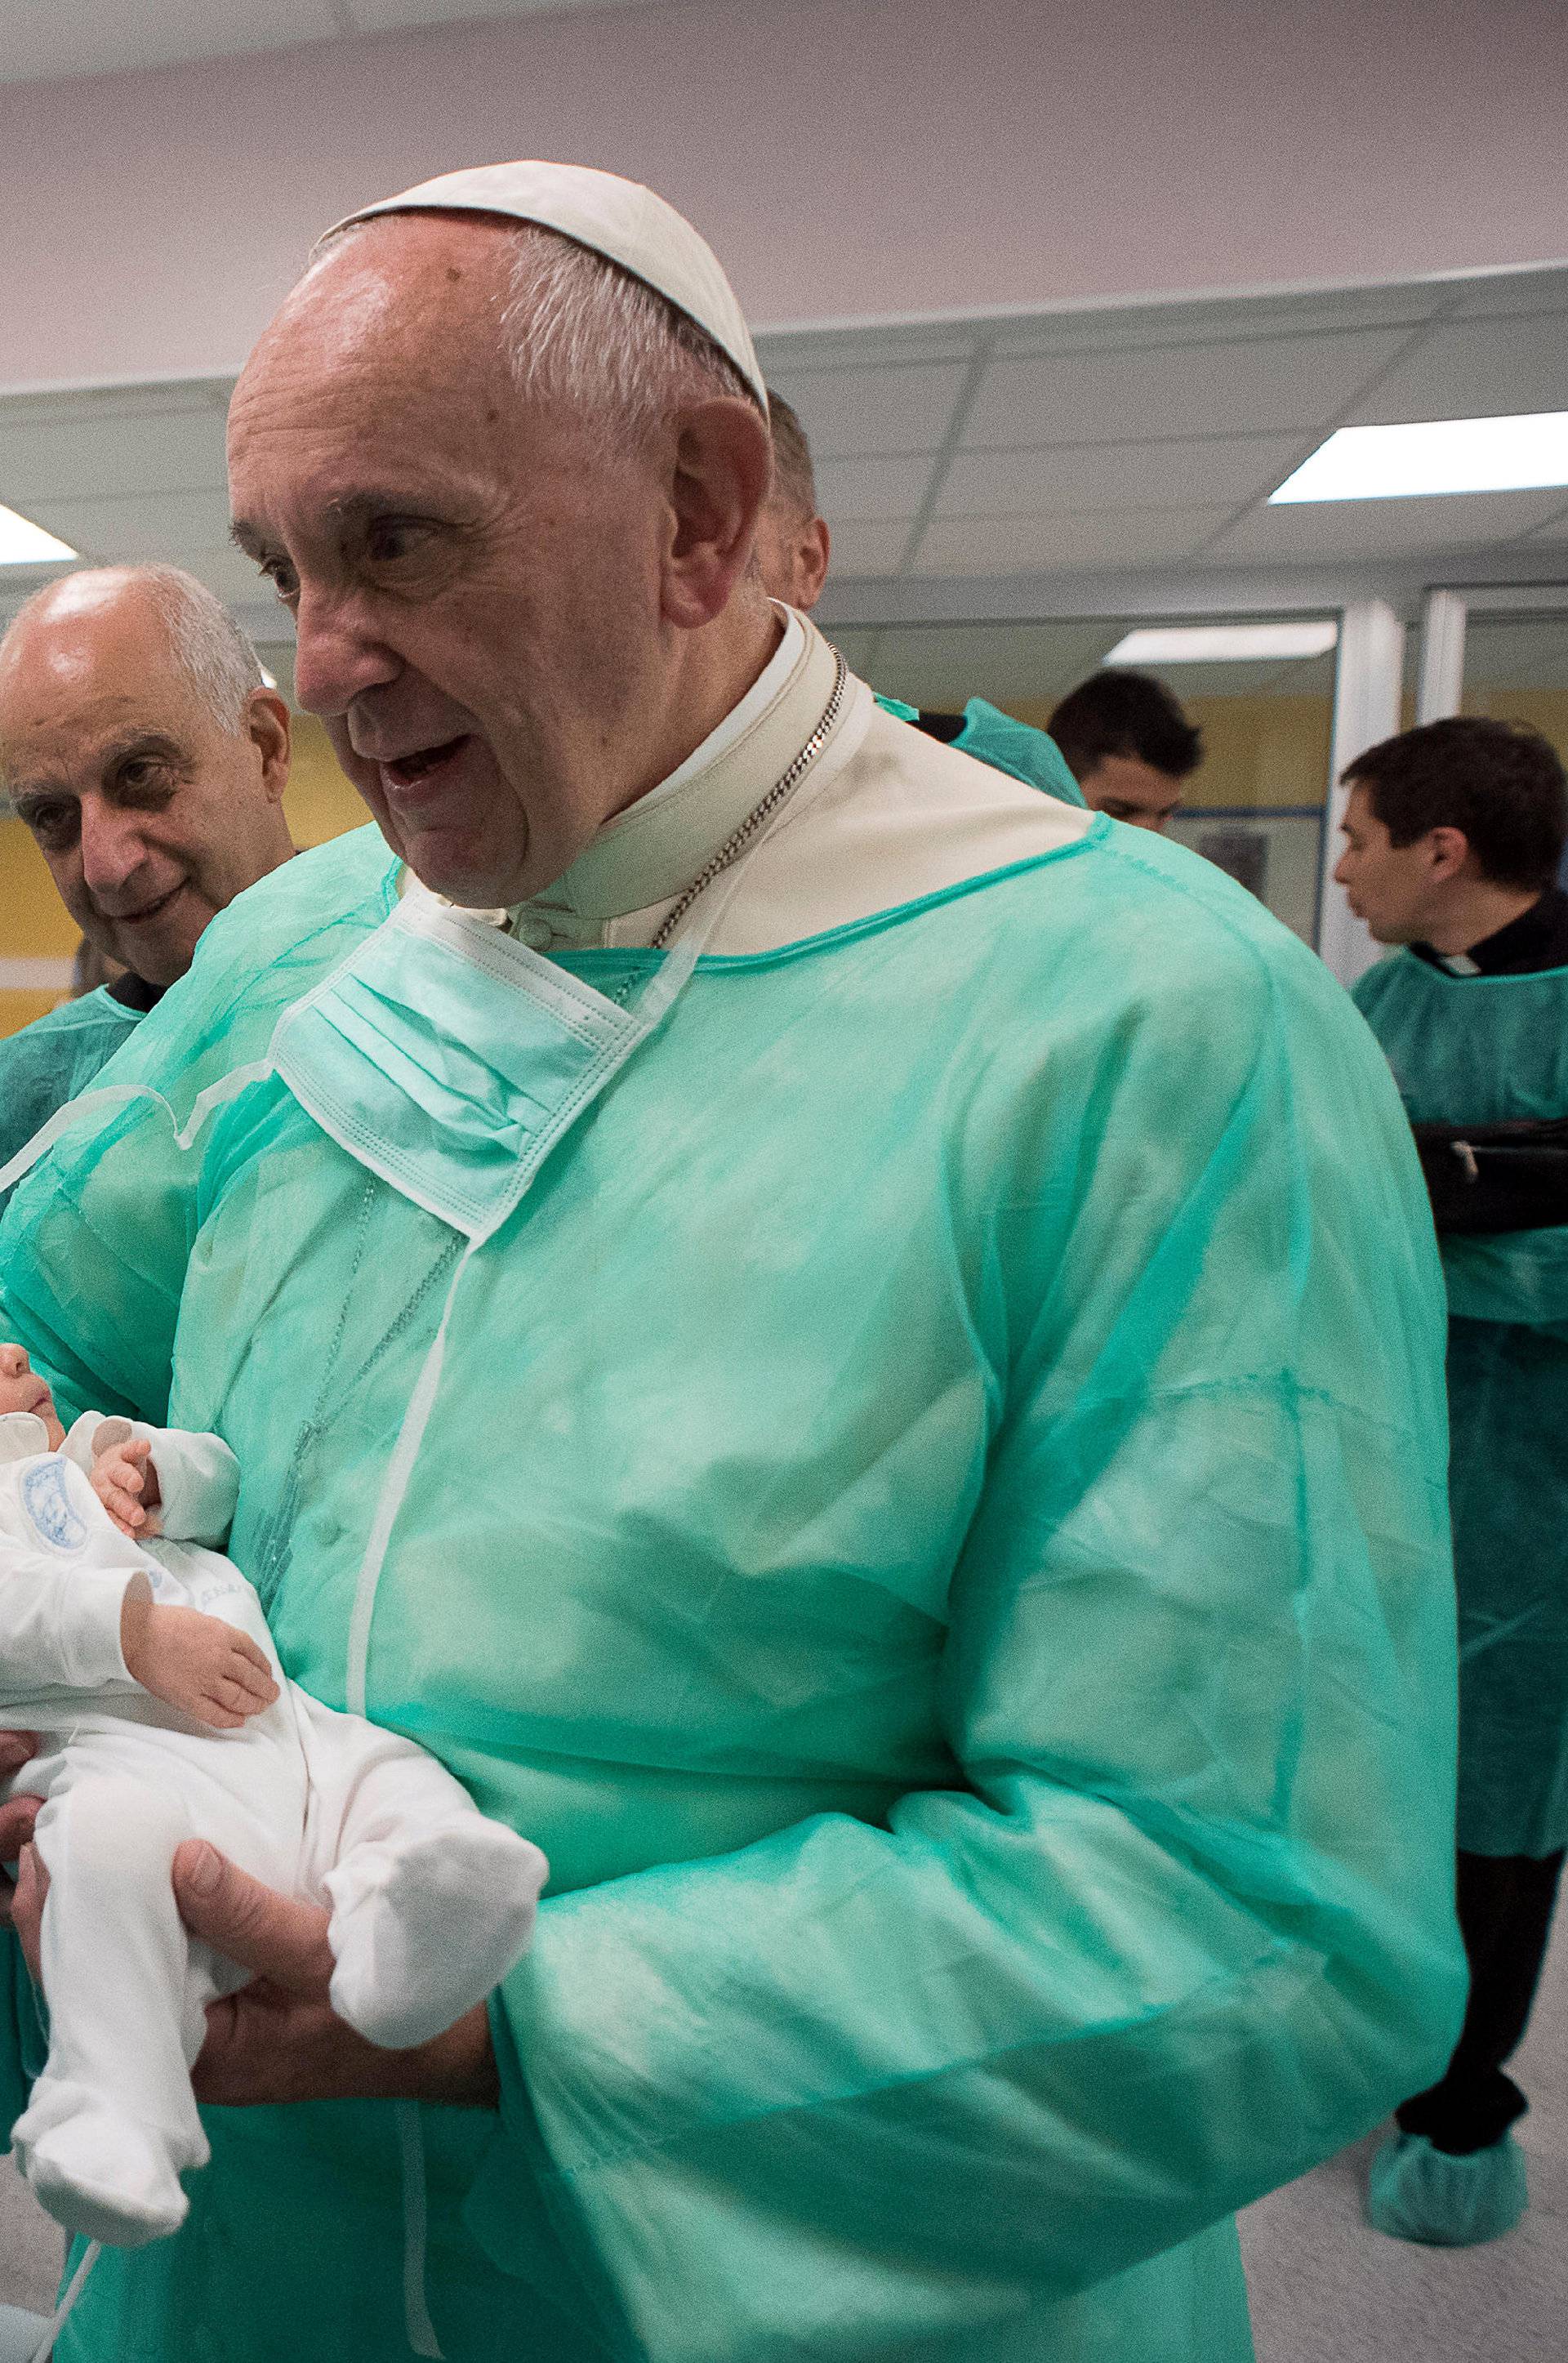 Pope Francis holds newly-born baby as he visits the San Giovanni hospital in Rome